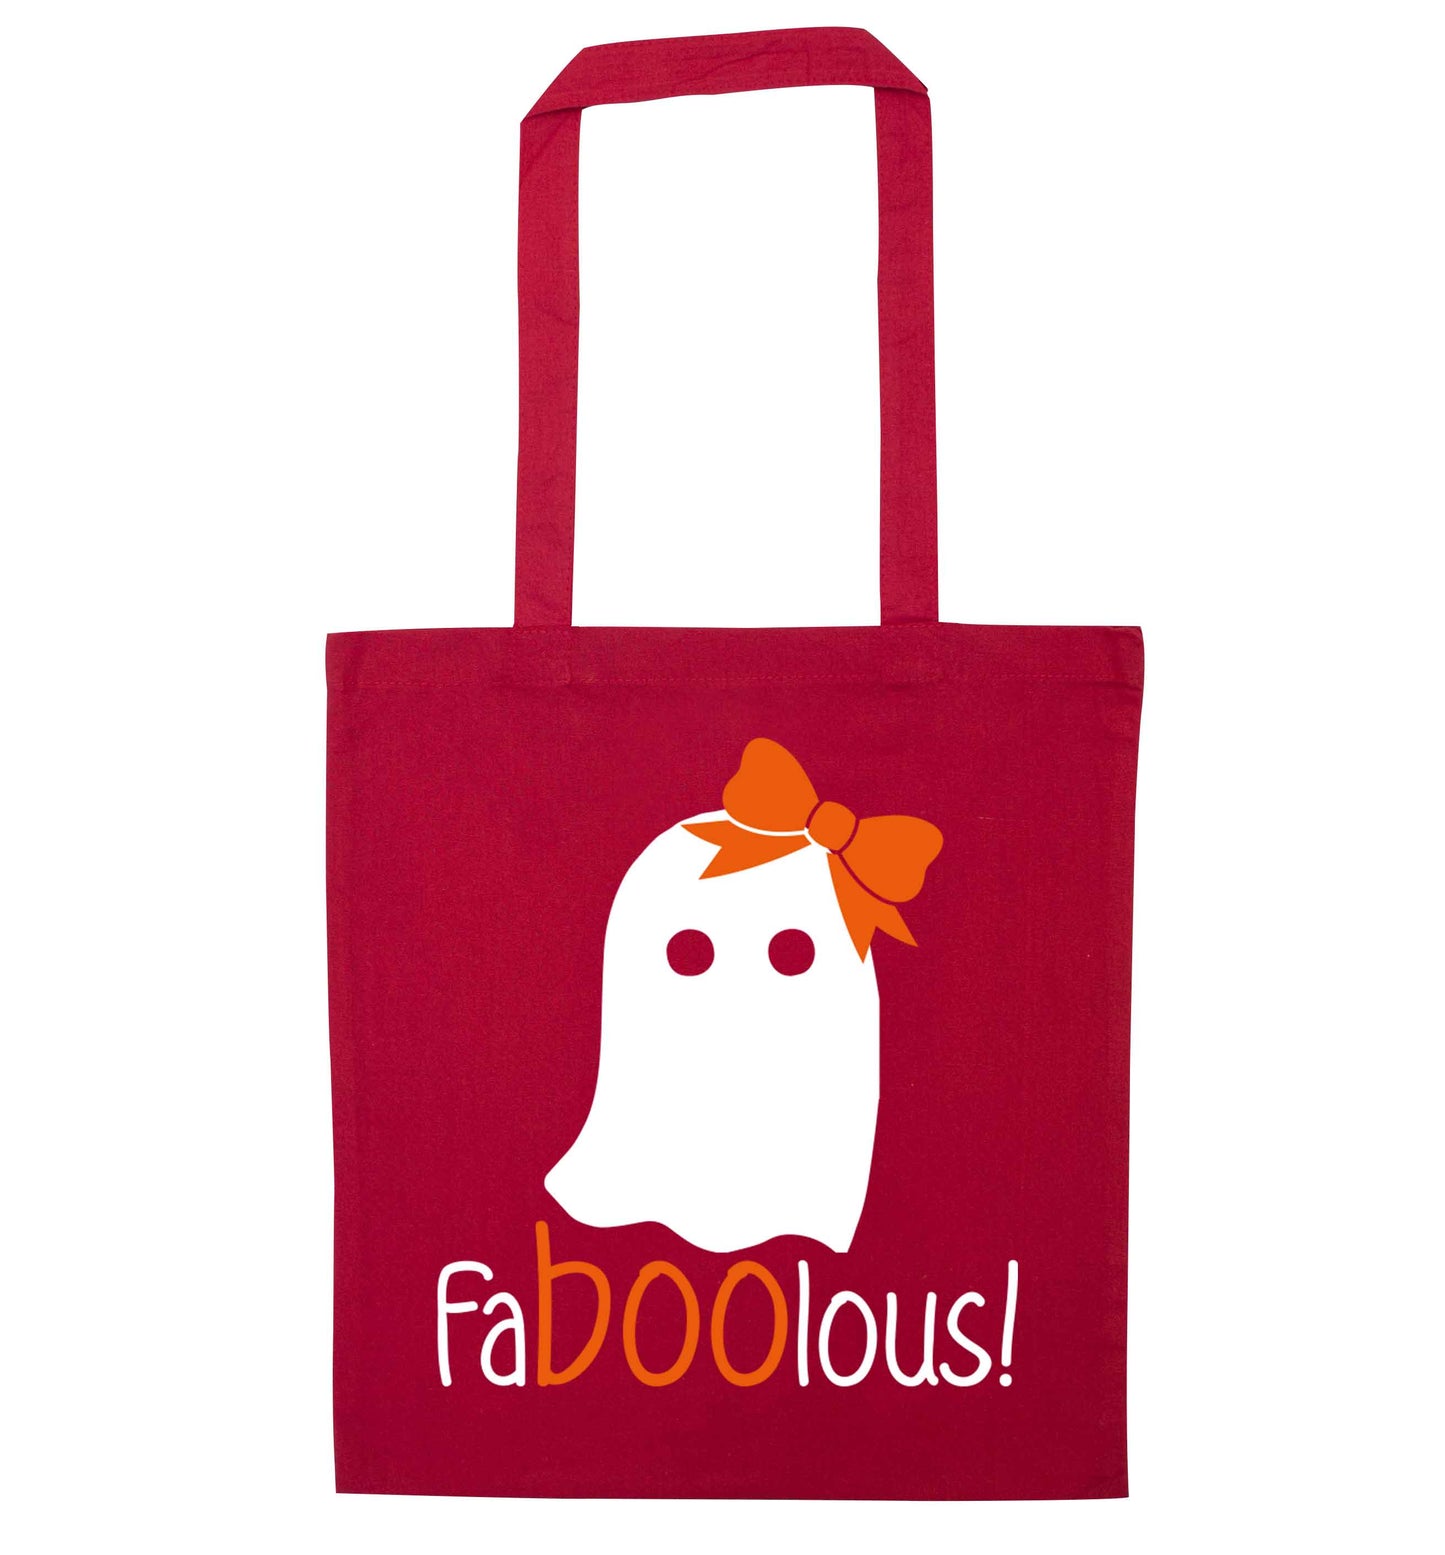 Faboolous ghost red tote bag